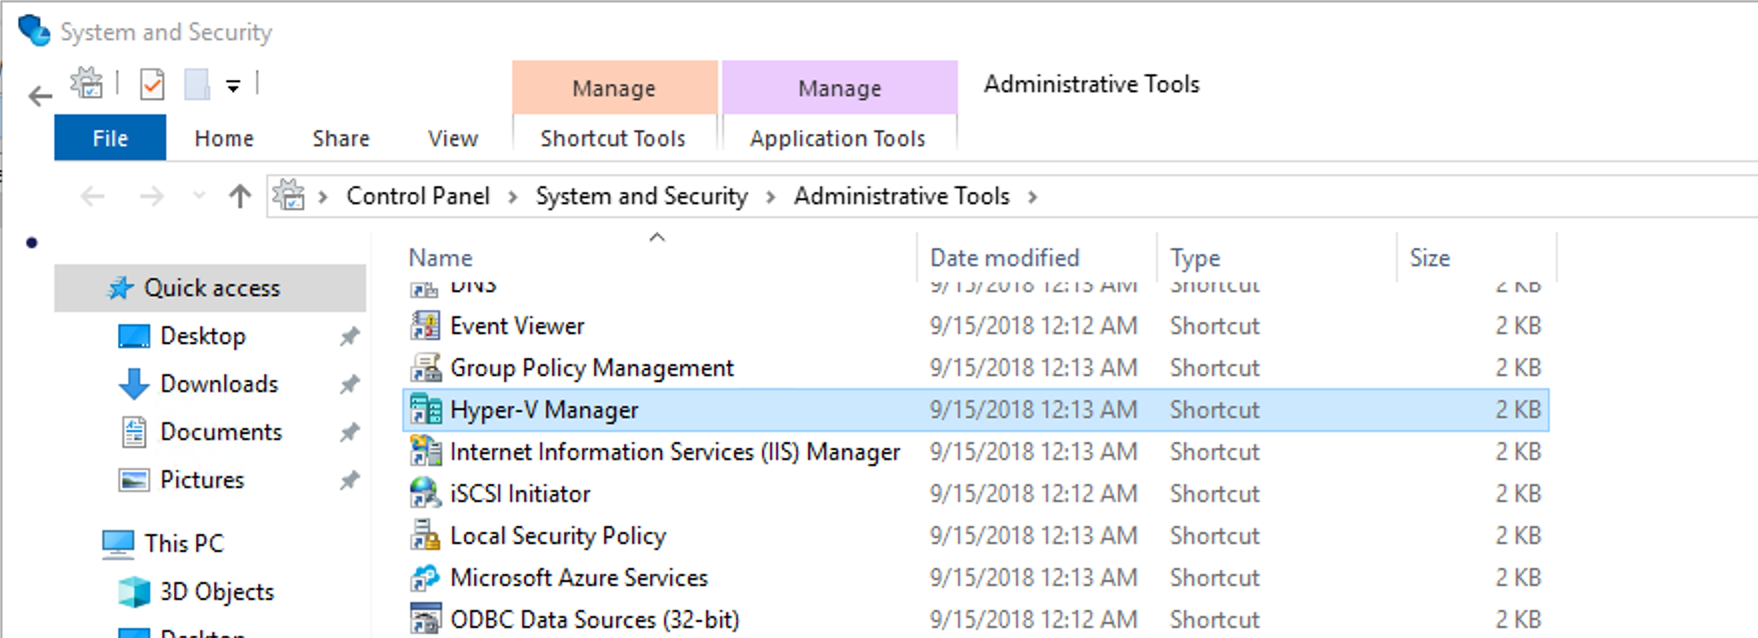 Open Hyper-V Manager by going to Control Panel > System & Security > Administrative Tools